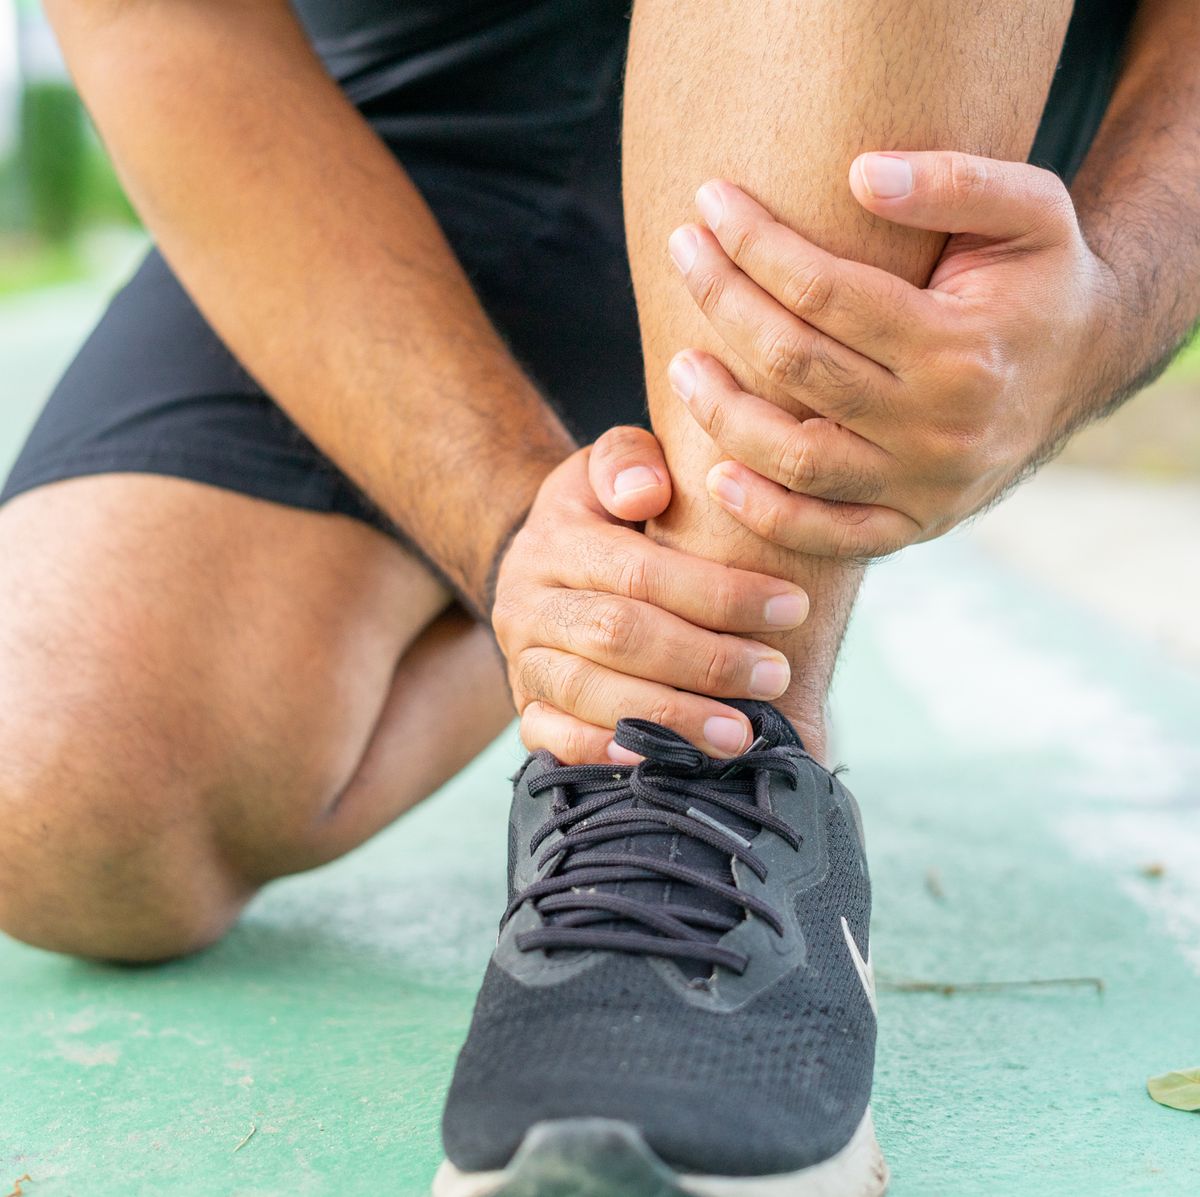 3 Levels of Ankle Sprains and How to Treat Them: Maryland